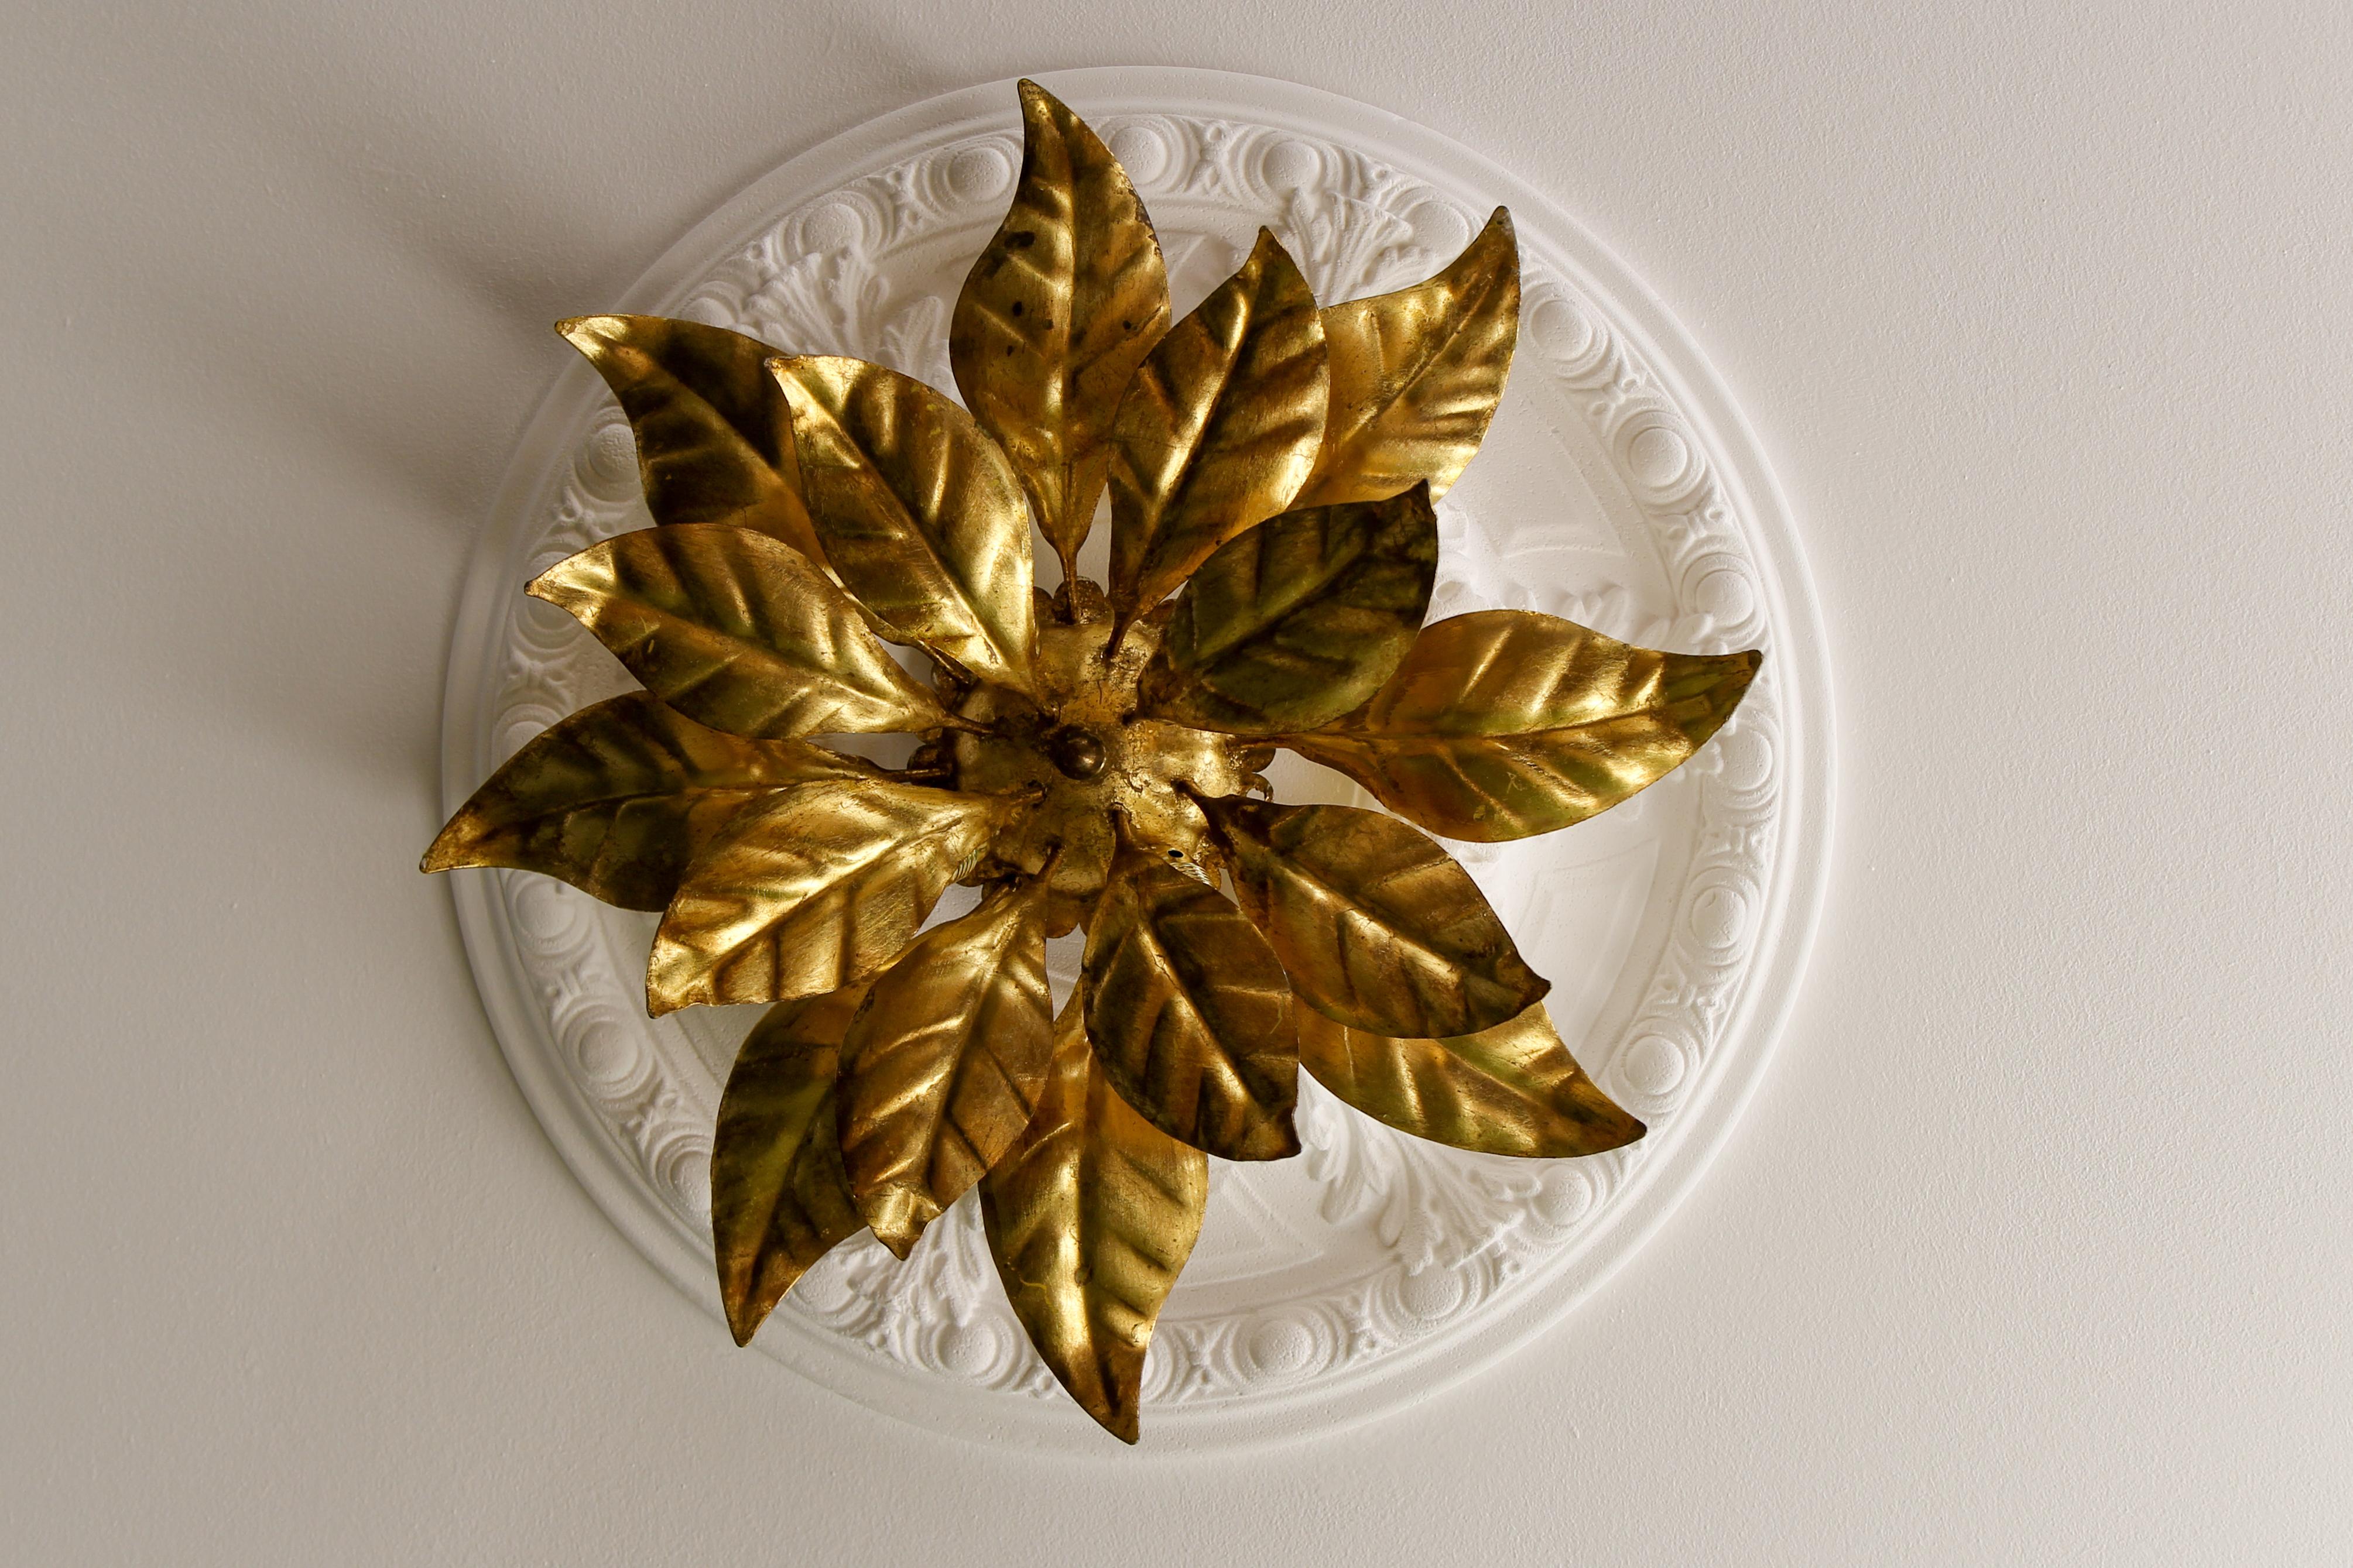 This gorgeous Hollywood Regency-style ceiling lamp is made of gilt metal and has four lights. It features beautifully sculpted golden leaves that form the shape of a large flower. The light fixture can be used as either a wall sconce or ceiling